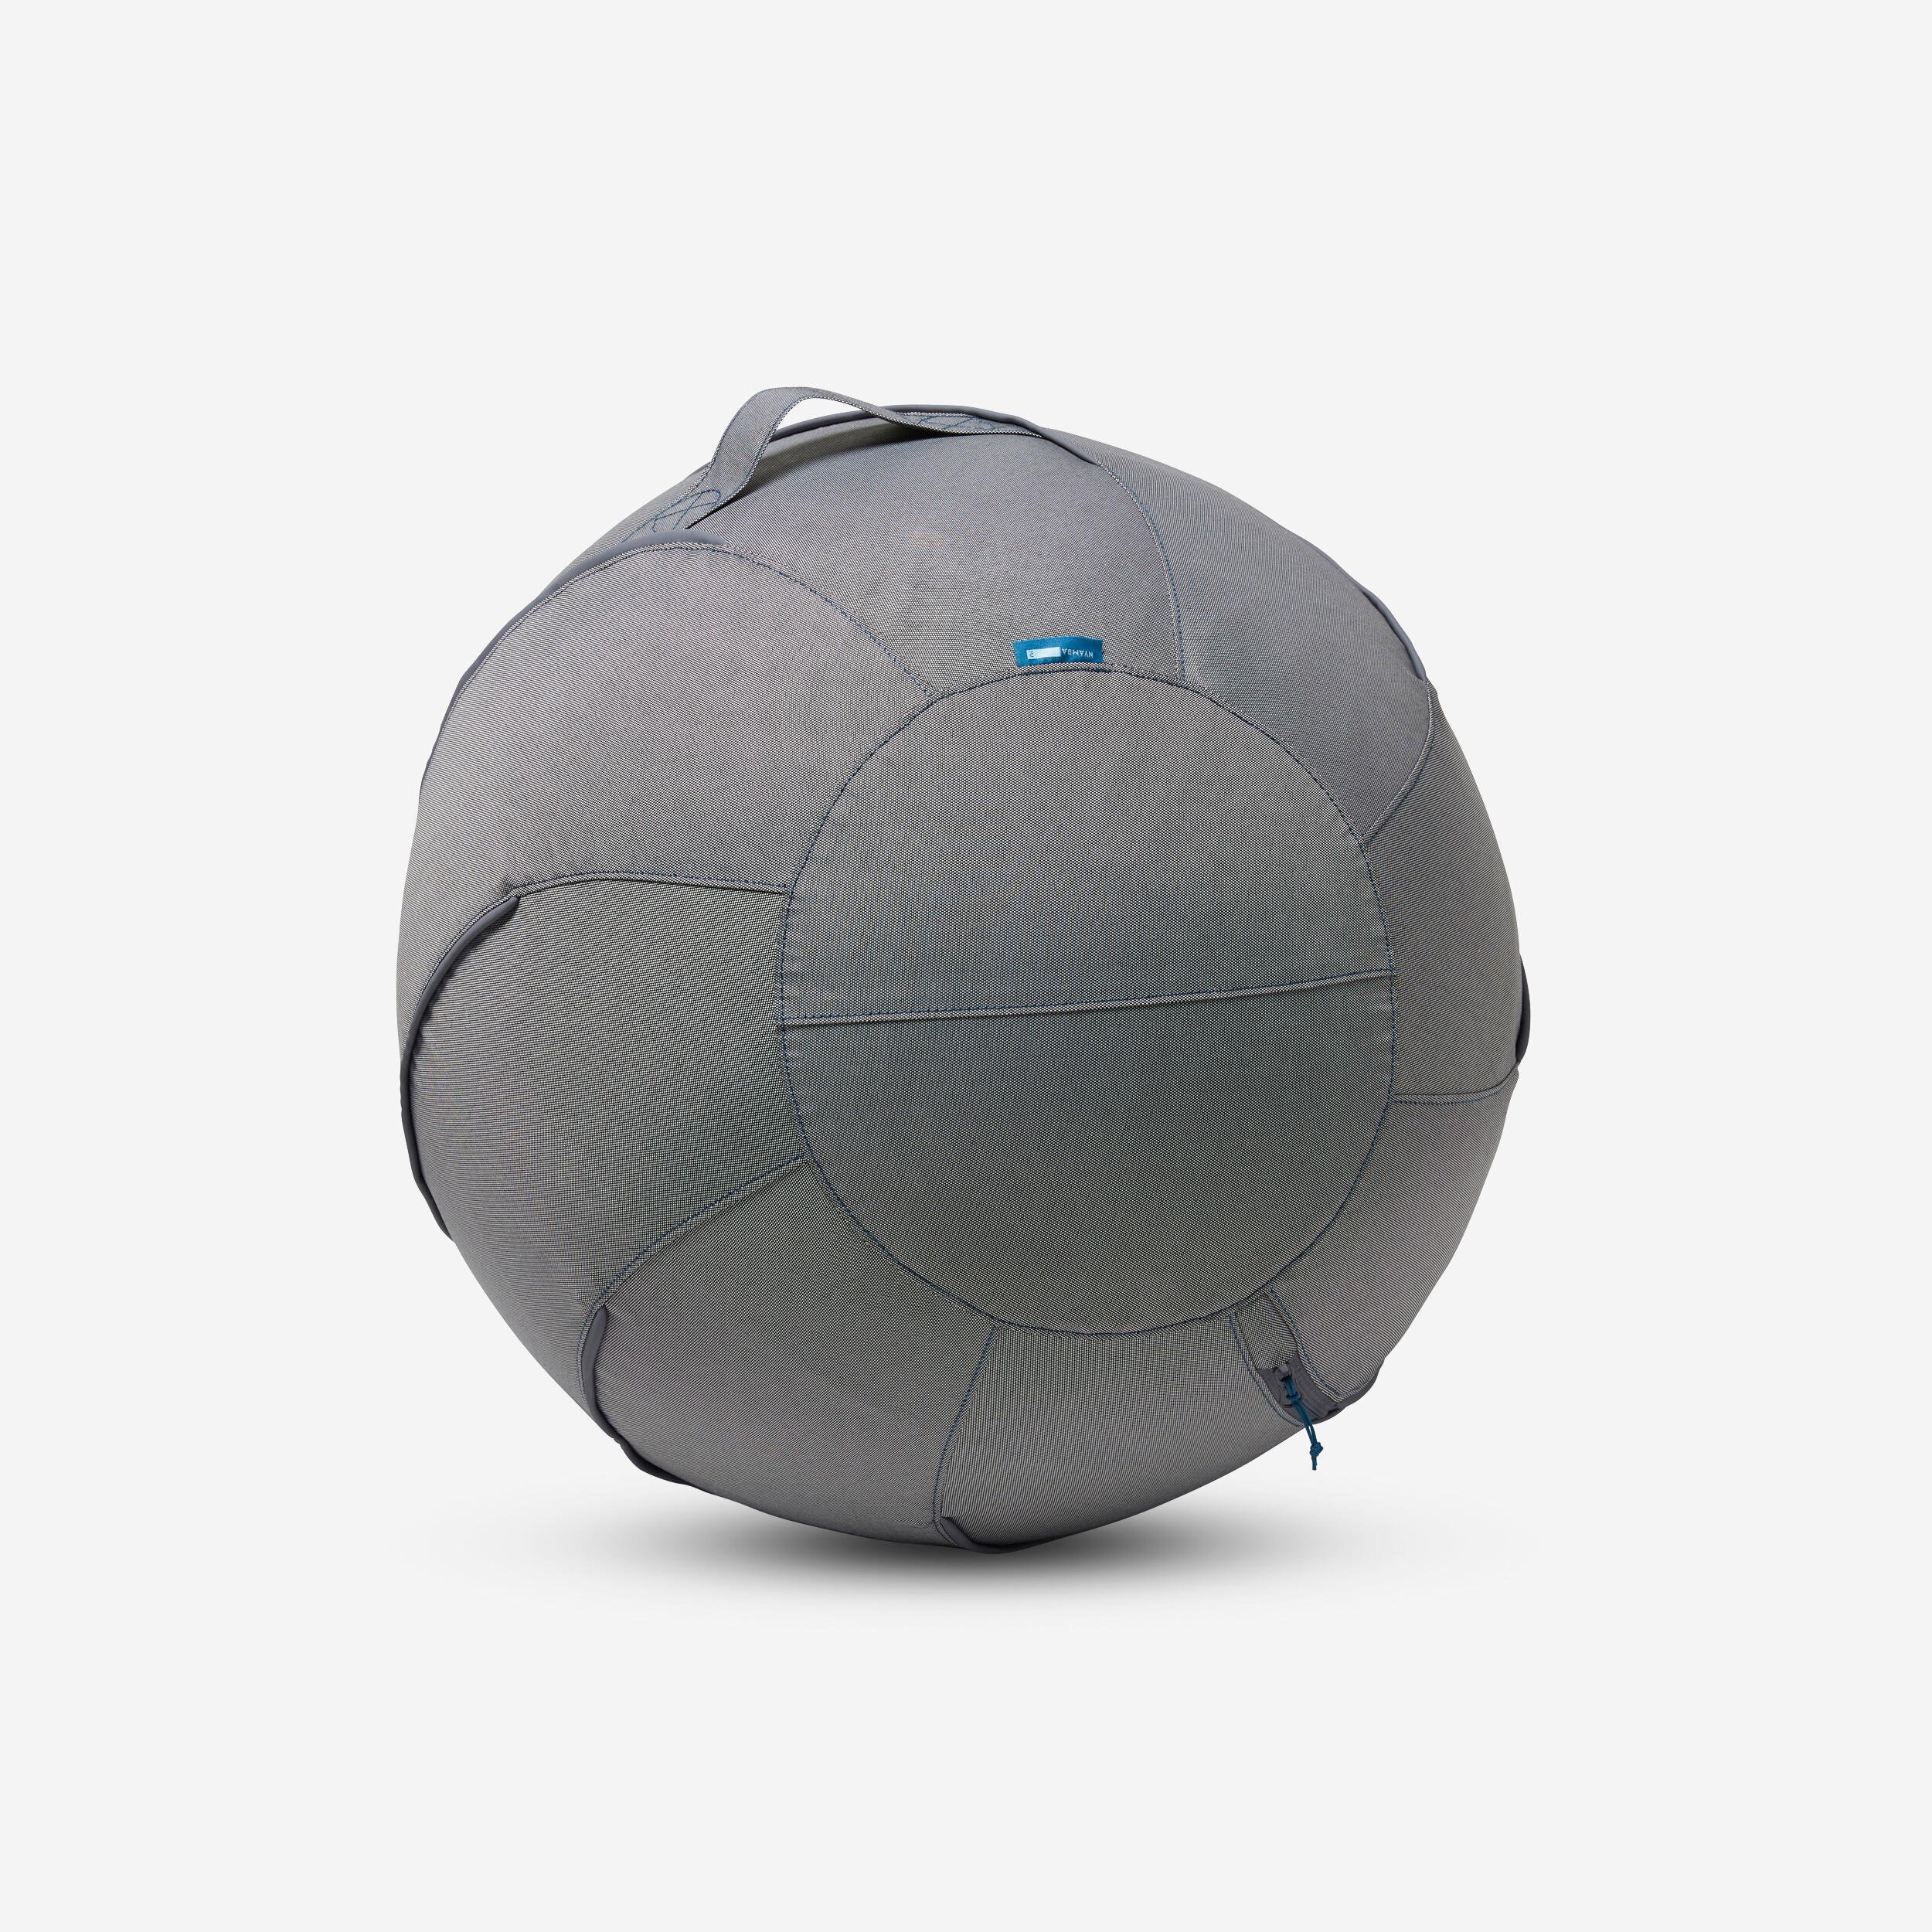 Decathlon UK - Do you want to improve your Pilates skills? This ball helps  you with your movements and positioning. Available in 2 different sizes.  #decathlonuk #decathlinsurreyquays #decafitsq #fitness #pilates #workout  #exercises #